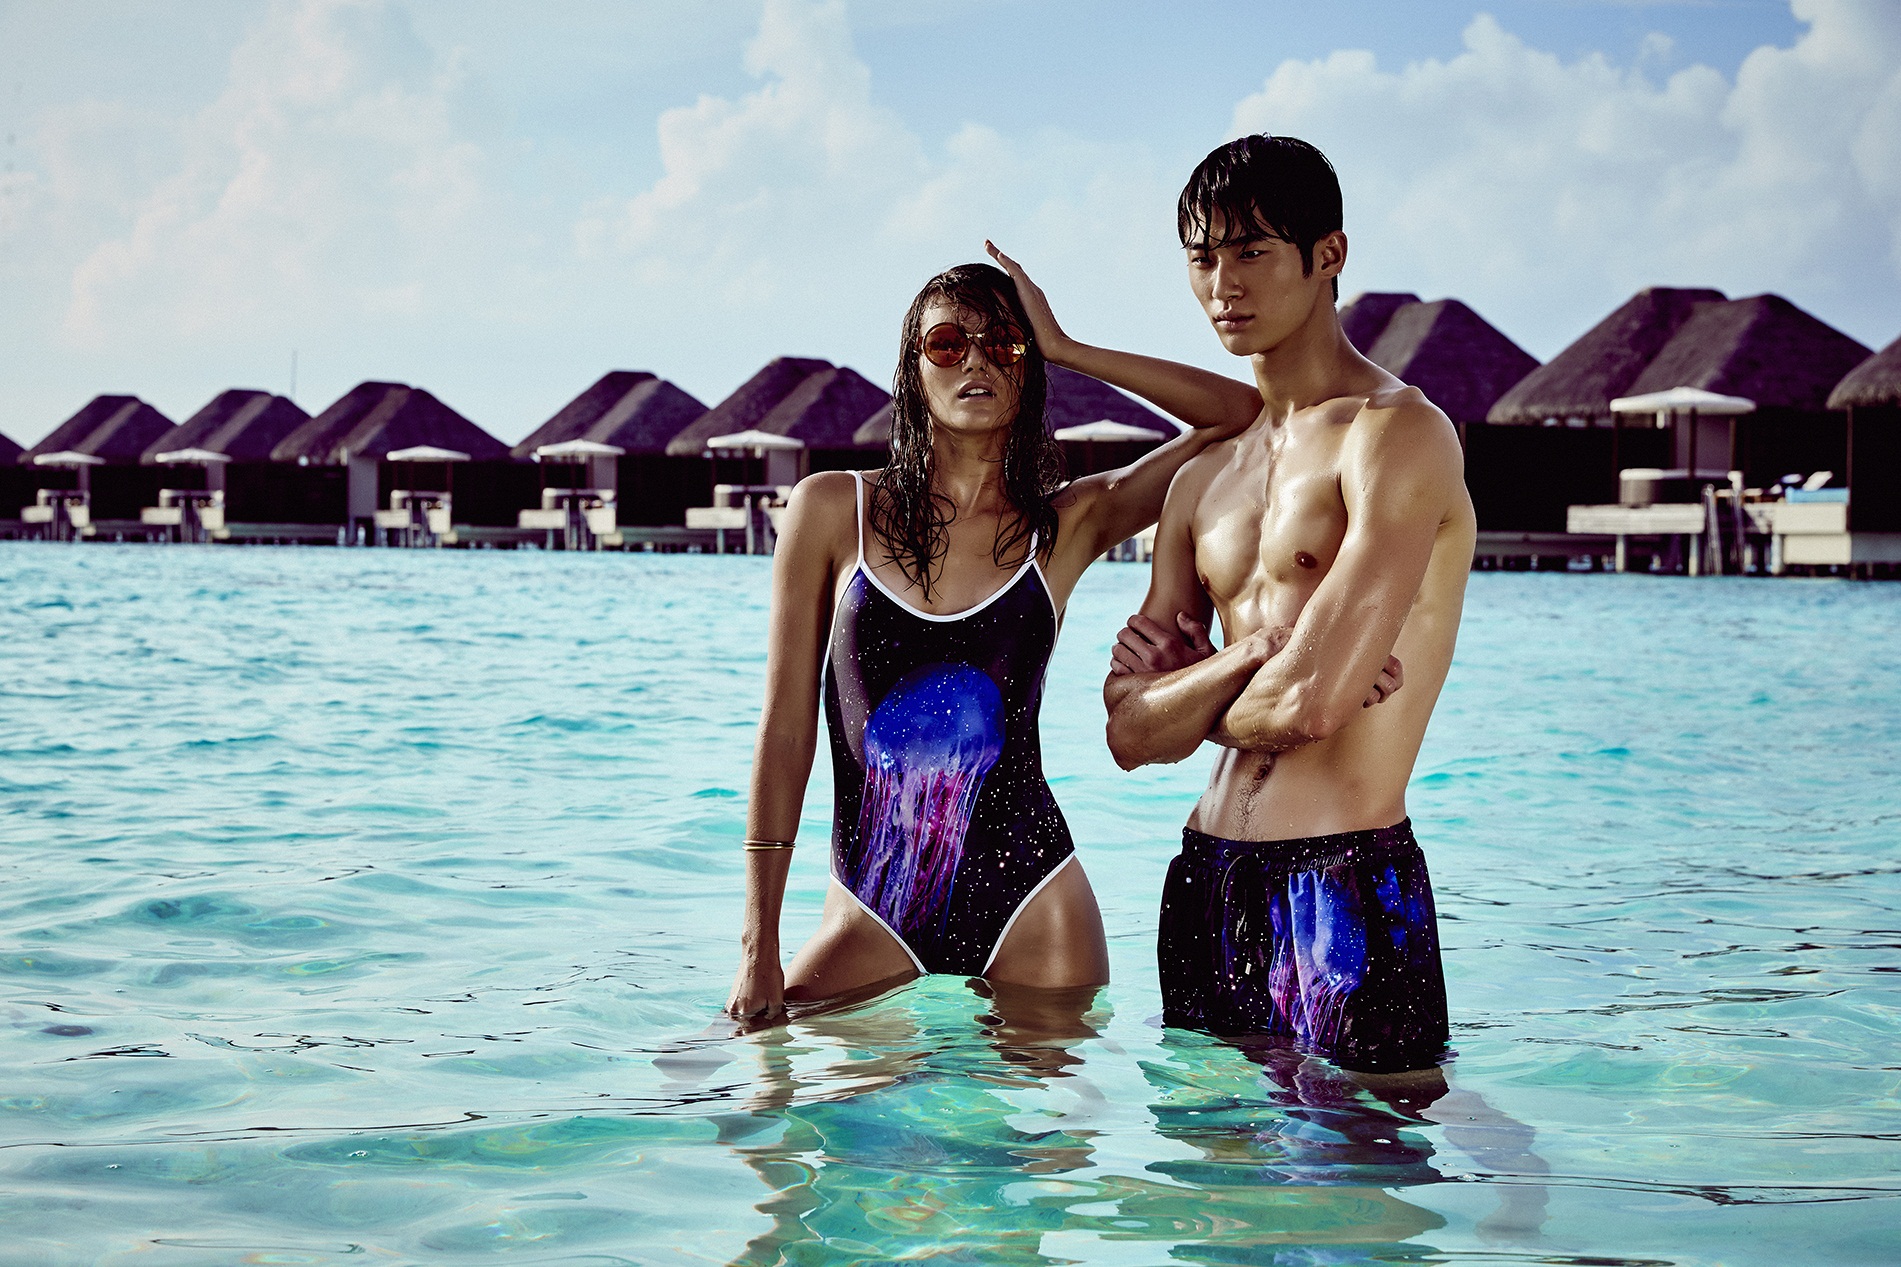 The swimwear was inspired by W's Asia Pacific retreats, such as the Maldives, here pictured.